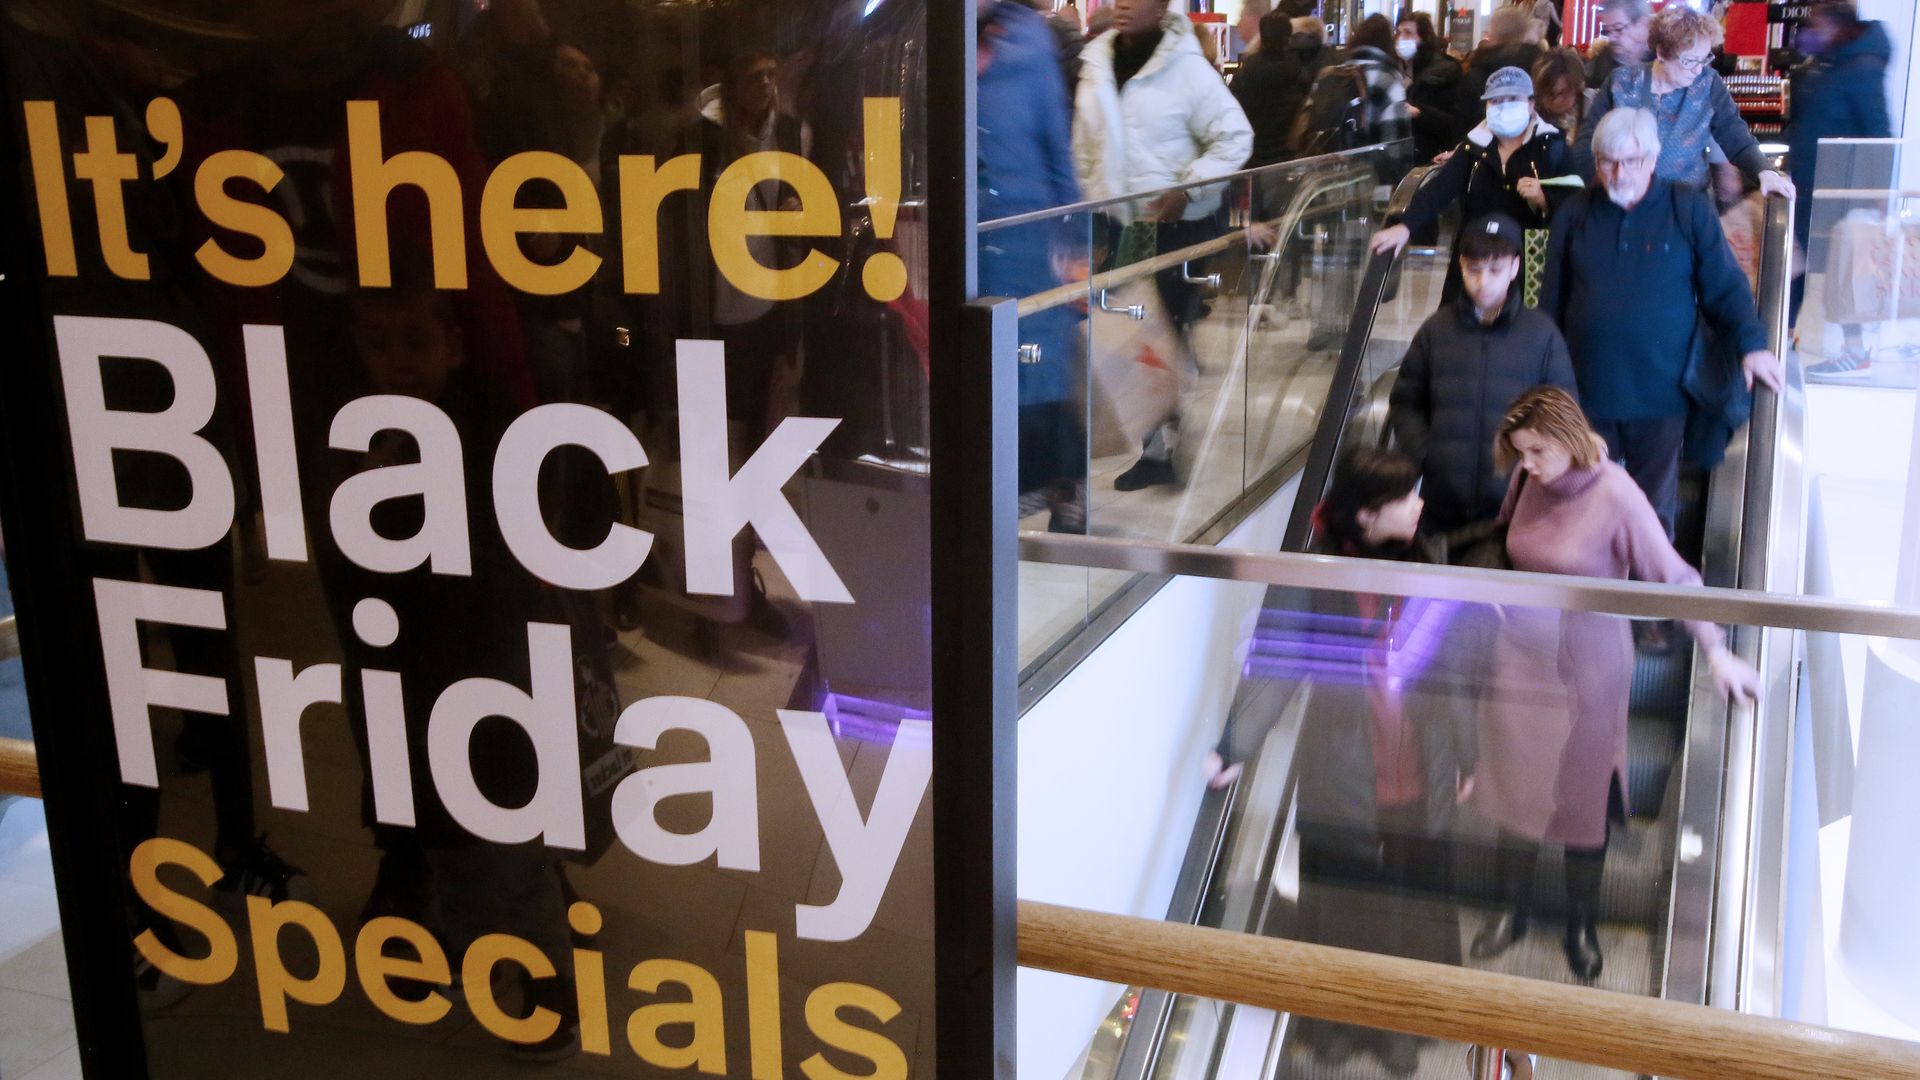 A sign that reads "It's here! Black Friday special" in front of shoppers on an escalator 